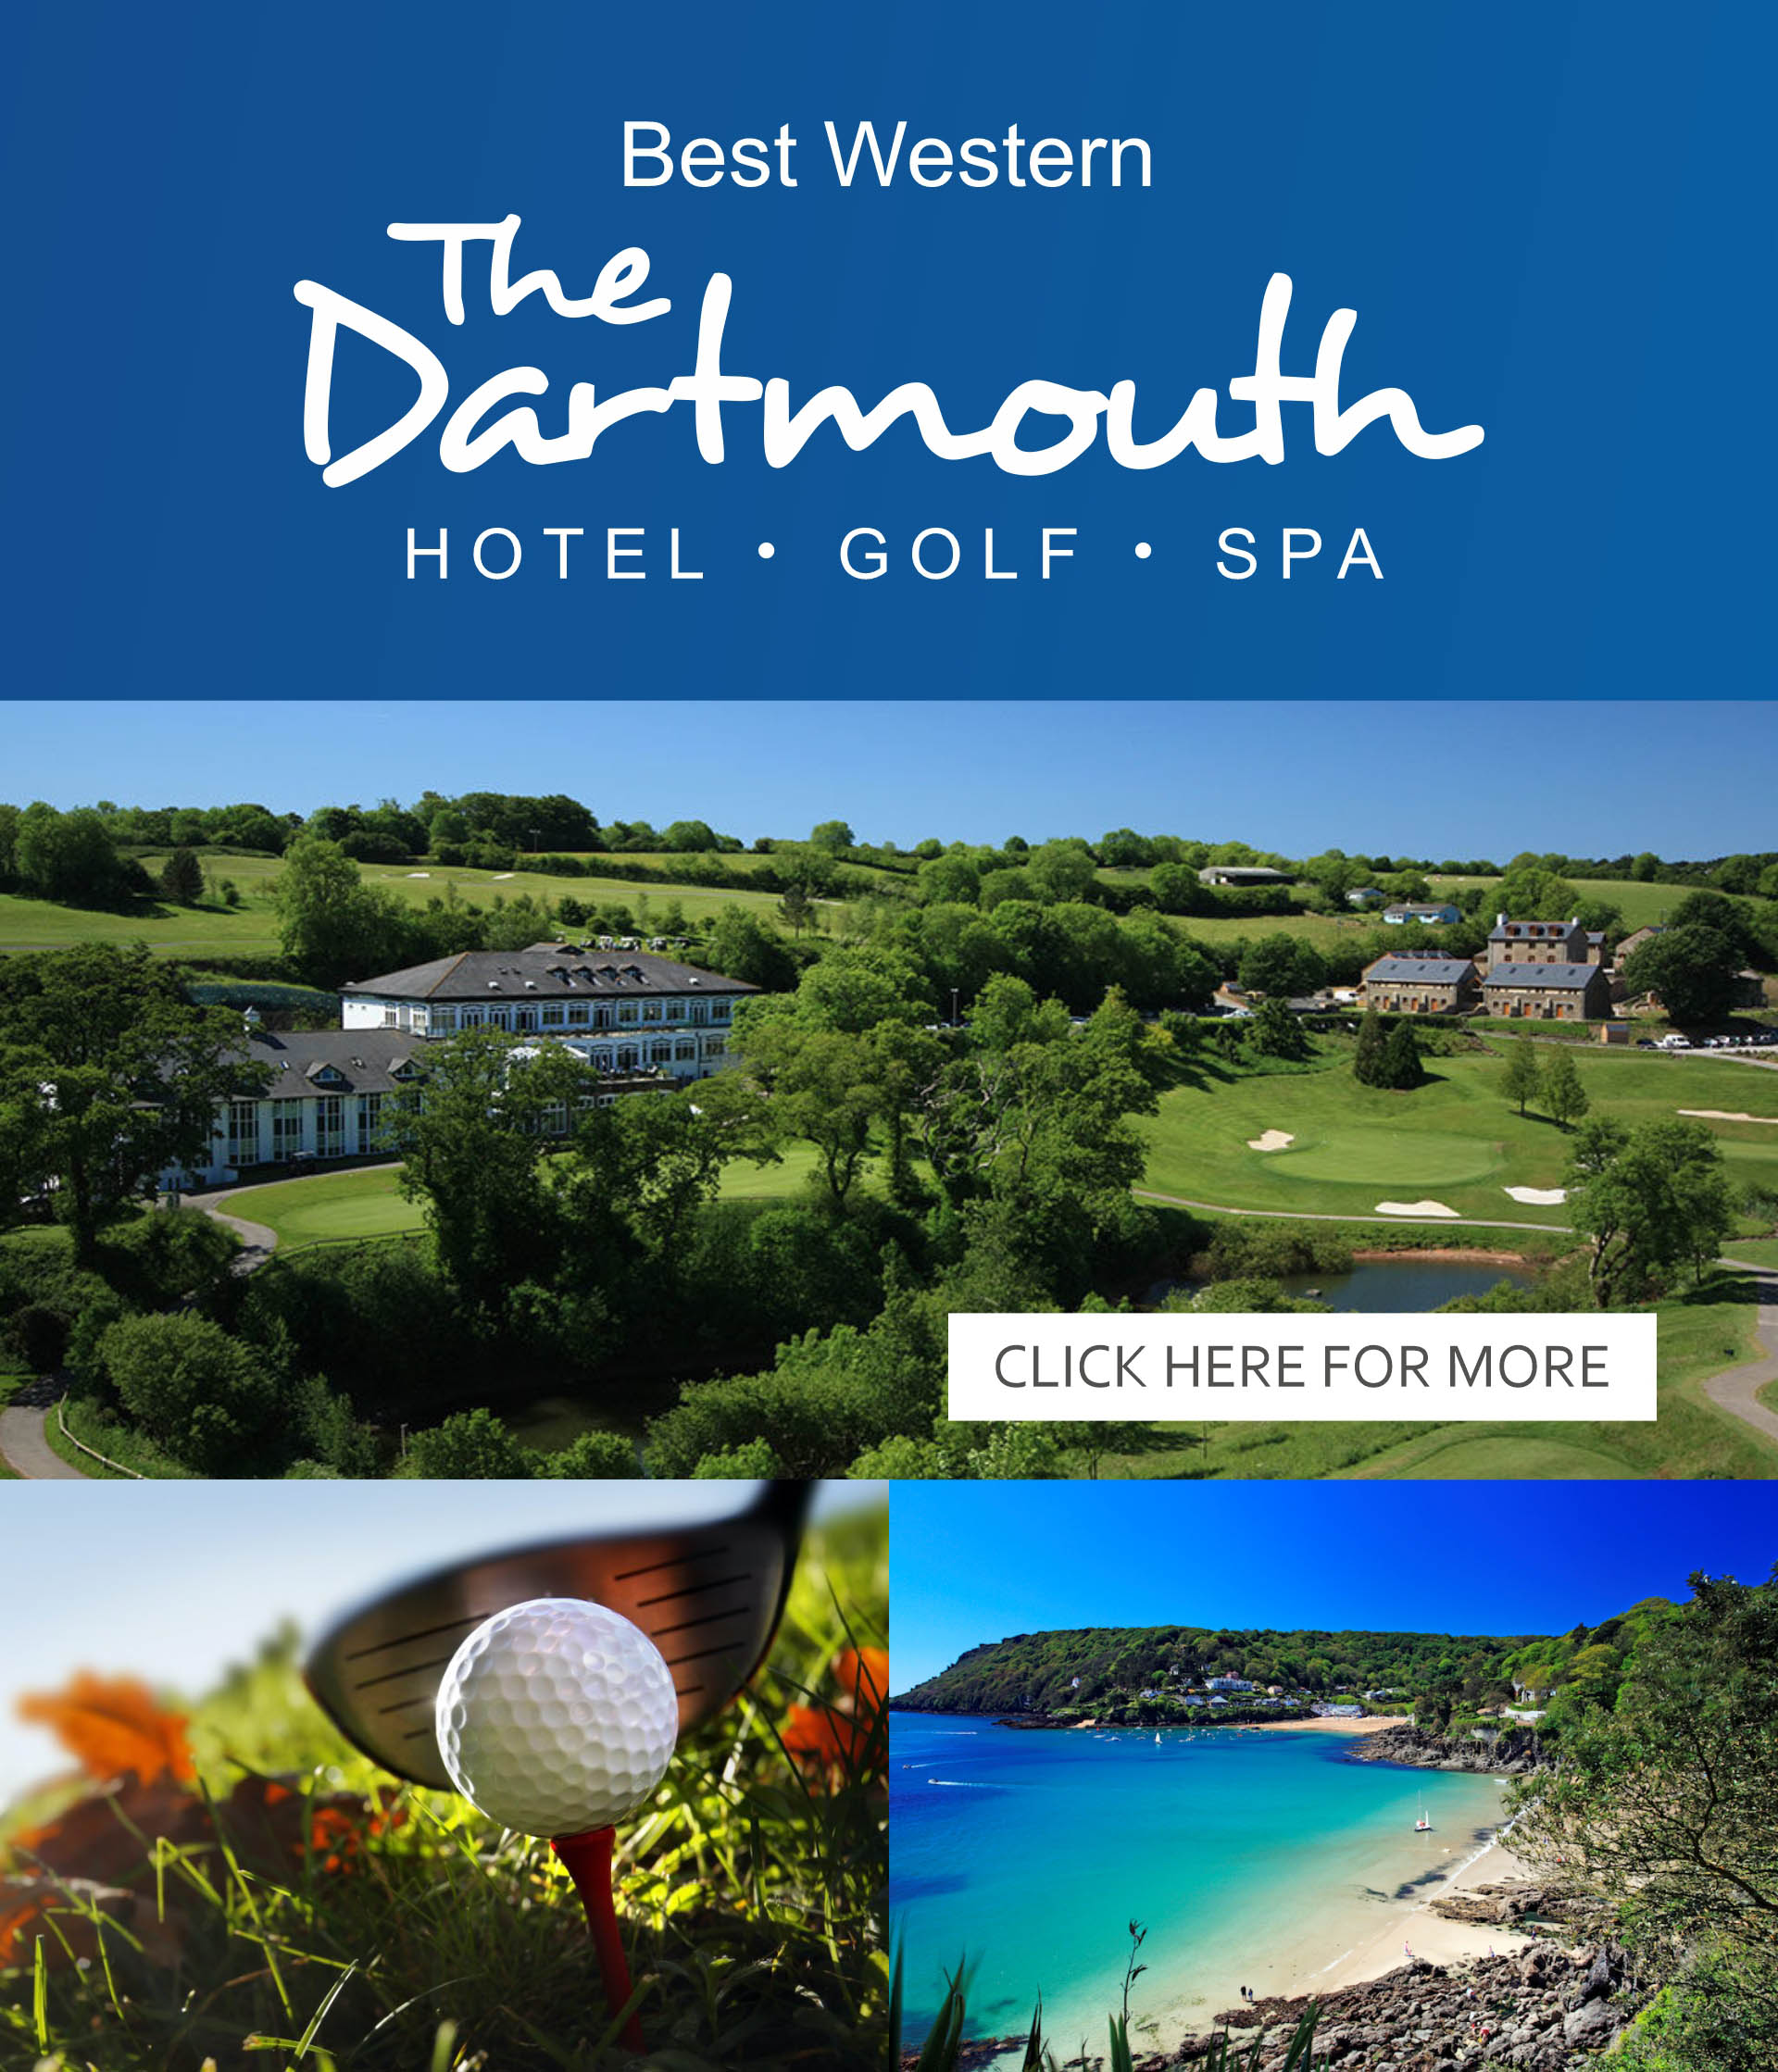 the Dartmouth Hotel, Golf & Spa Meeting offer